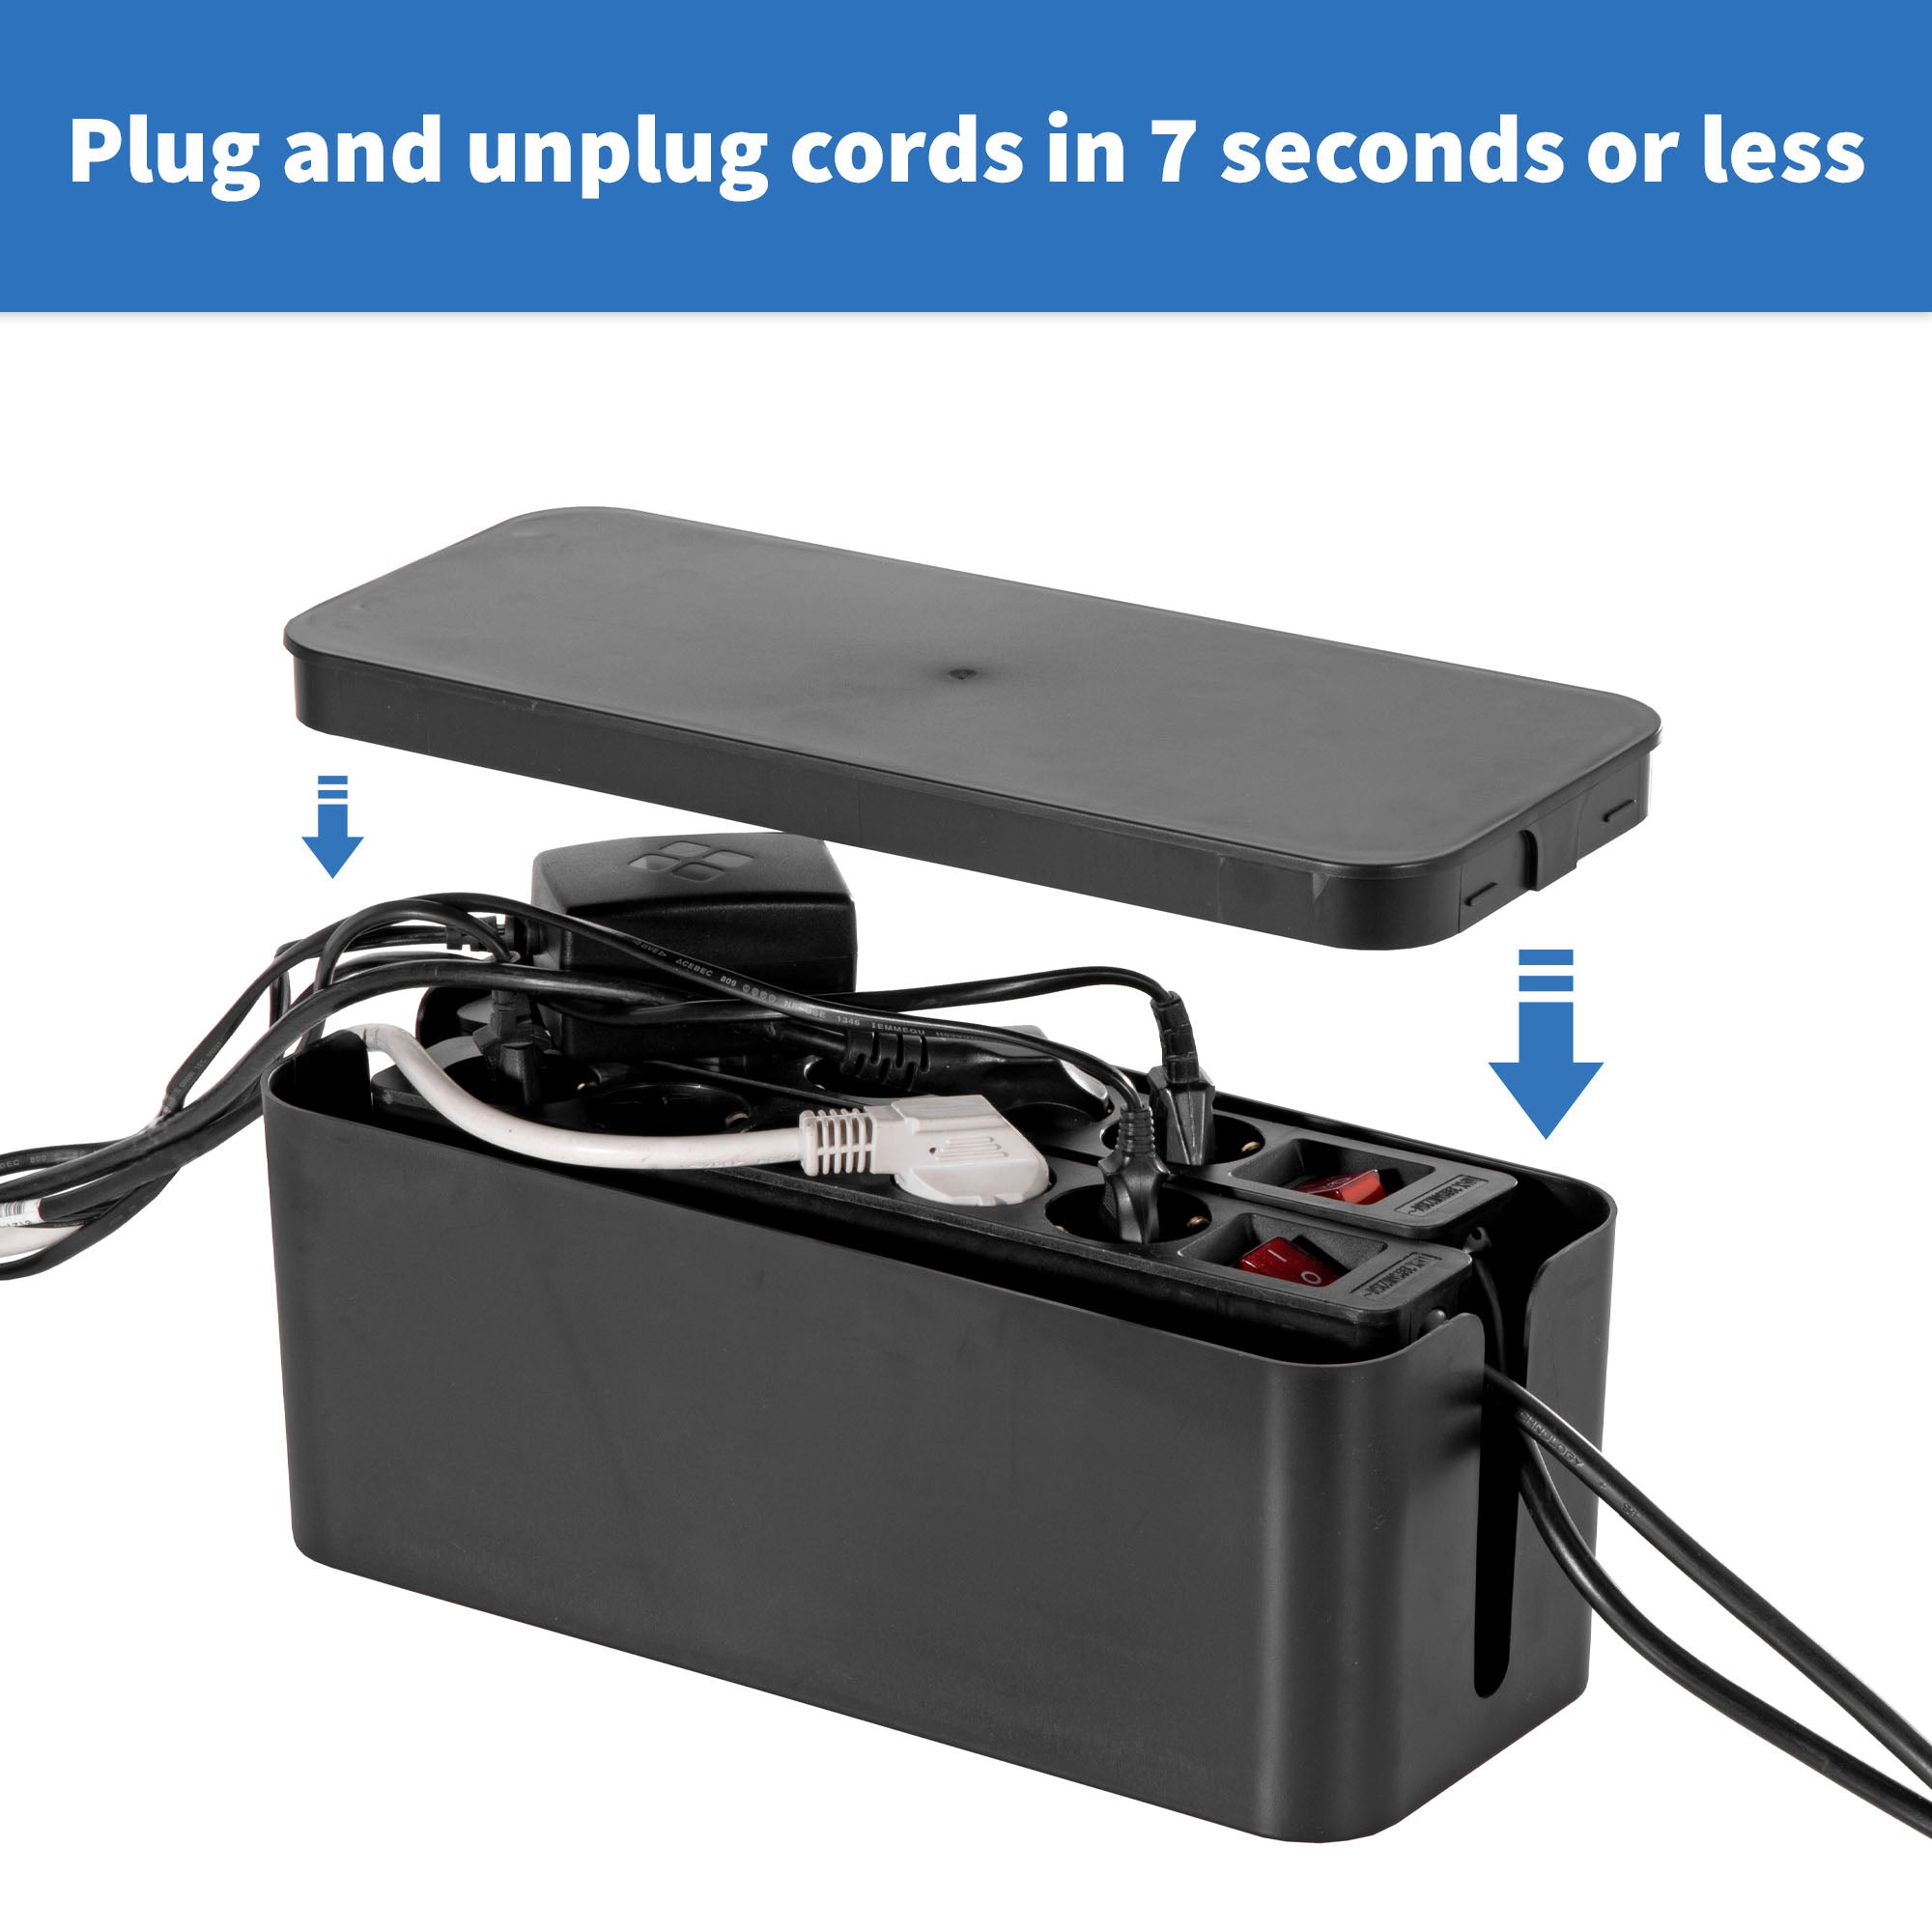 Cable Management Box,Cord Box to Hide Power Strips,Cord Organizer